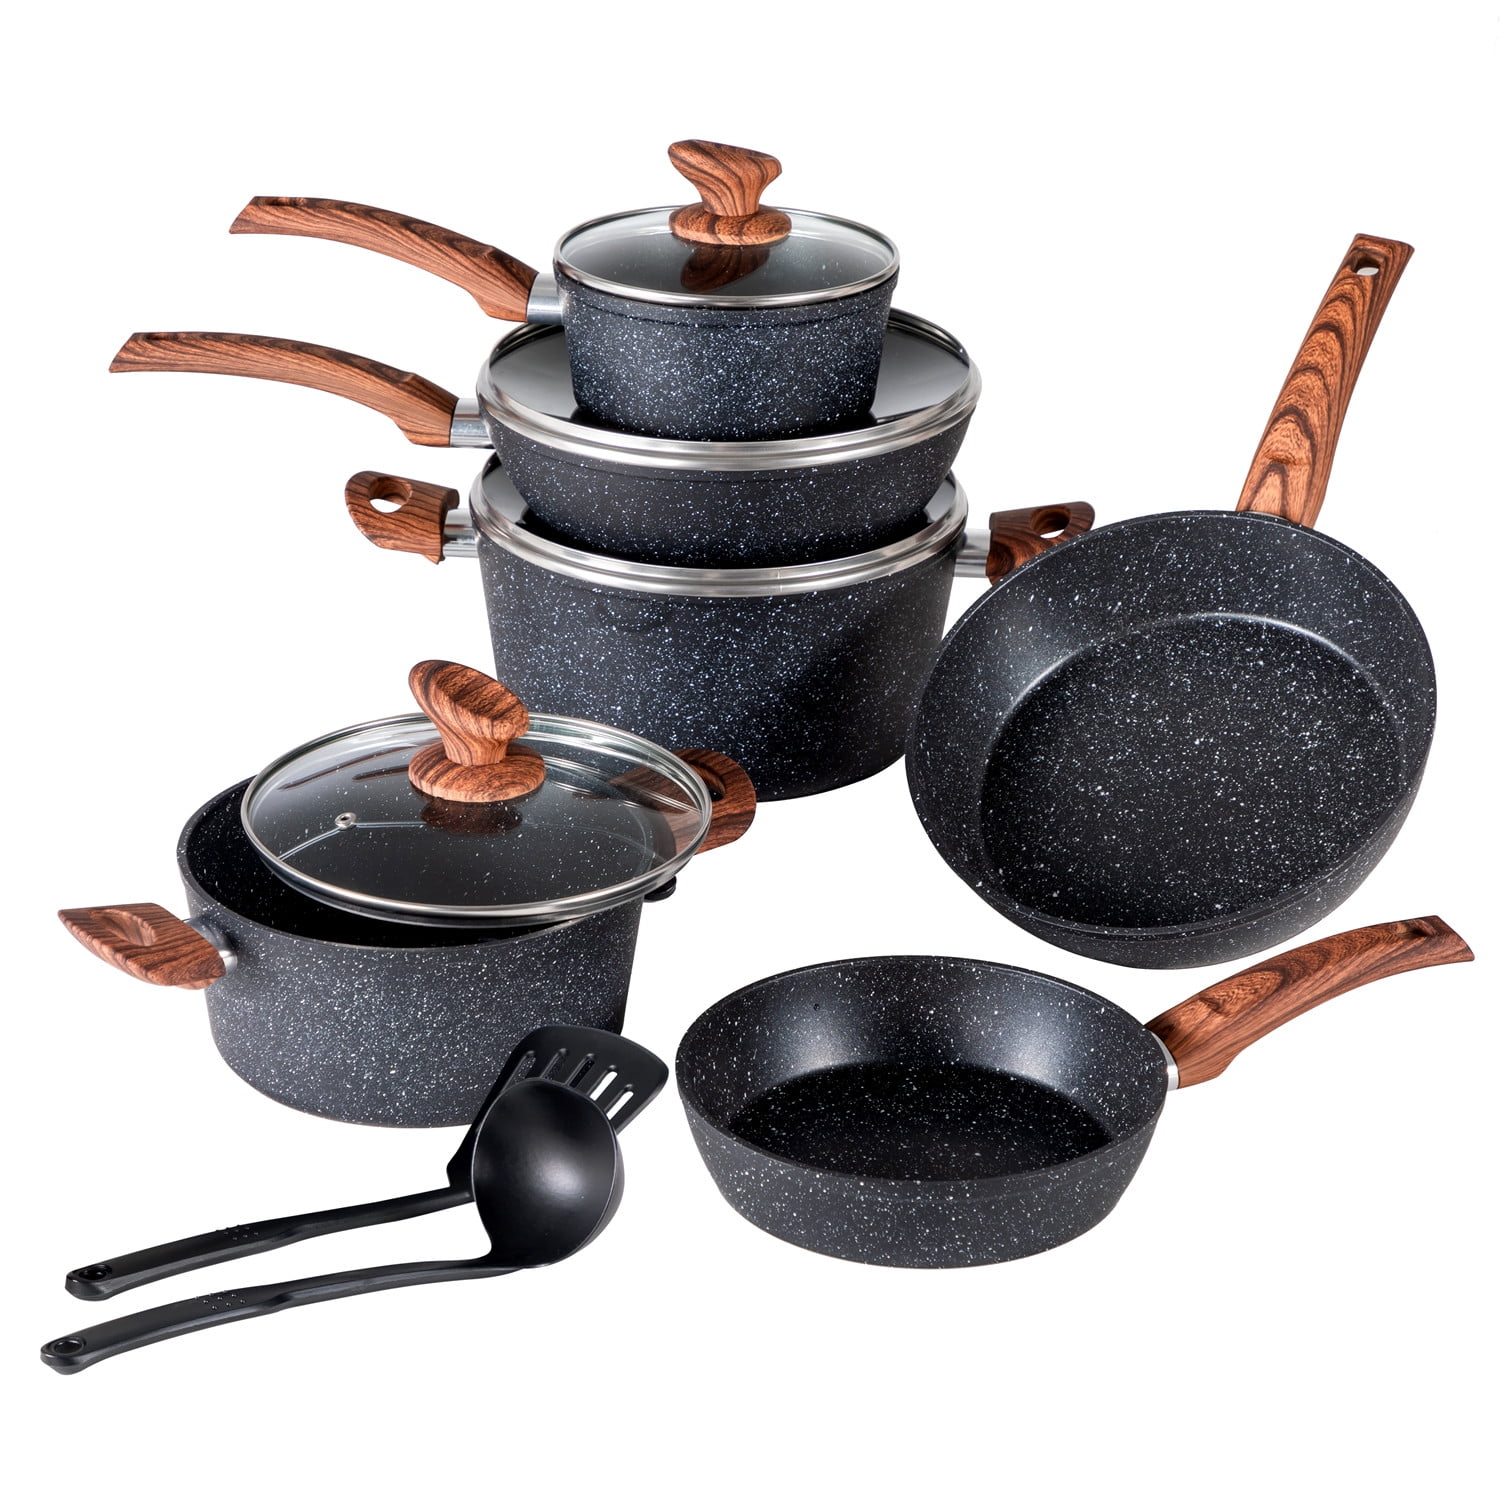 Aoibox Nonstick Pots and Pans Set, 8 Pcs Granite Stone Kitchen Cookware  Sets (Black) SNSA10IN412 - The Home Depot